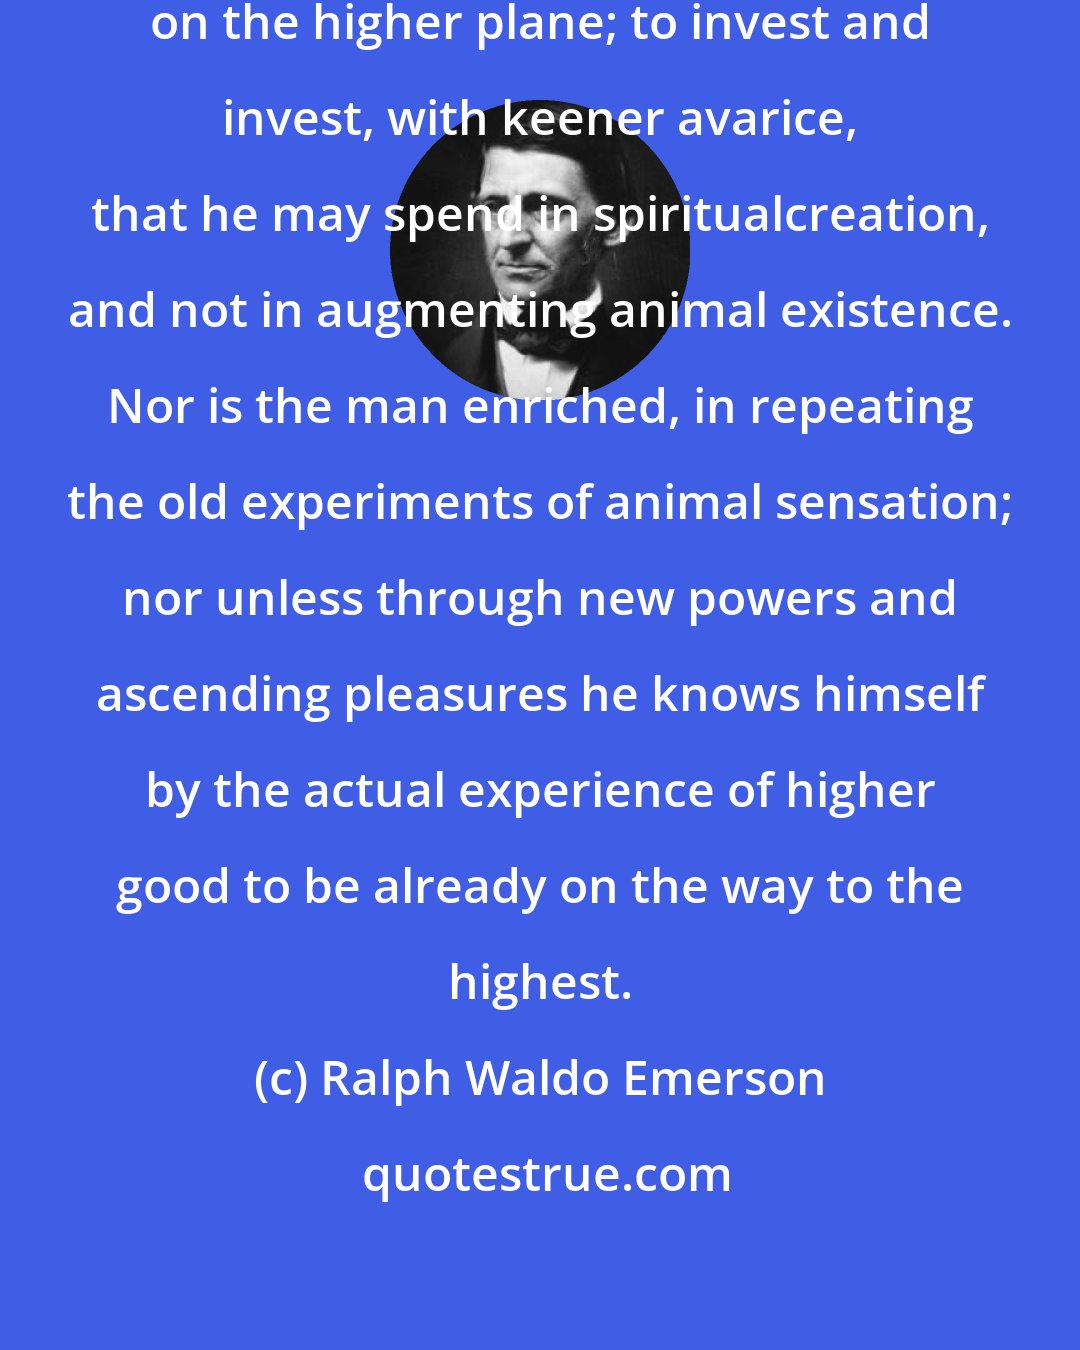 Ralph Waldo Emerson: The true thrift is always to spend on the higher plane; to invest and invest, with keener avarice, that he may spend in spiritualcreation, and not in augmenting animal existence. Nor is the man enriched, in repeating the old experiments of animal sensation; nor unless through new powers and ascending pleasures he knows himself by the actual experience of higher good to be already on the way to the highest.